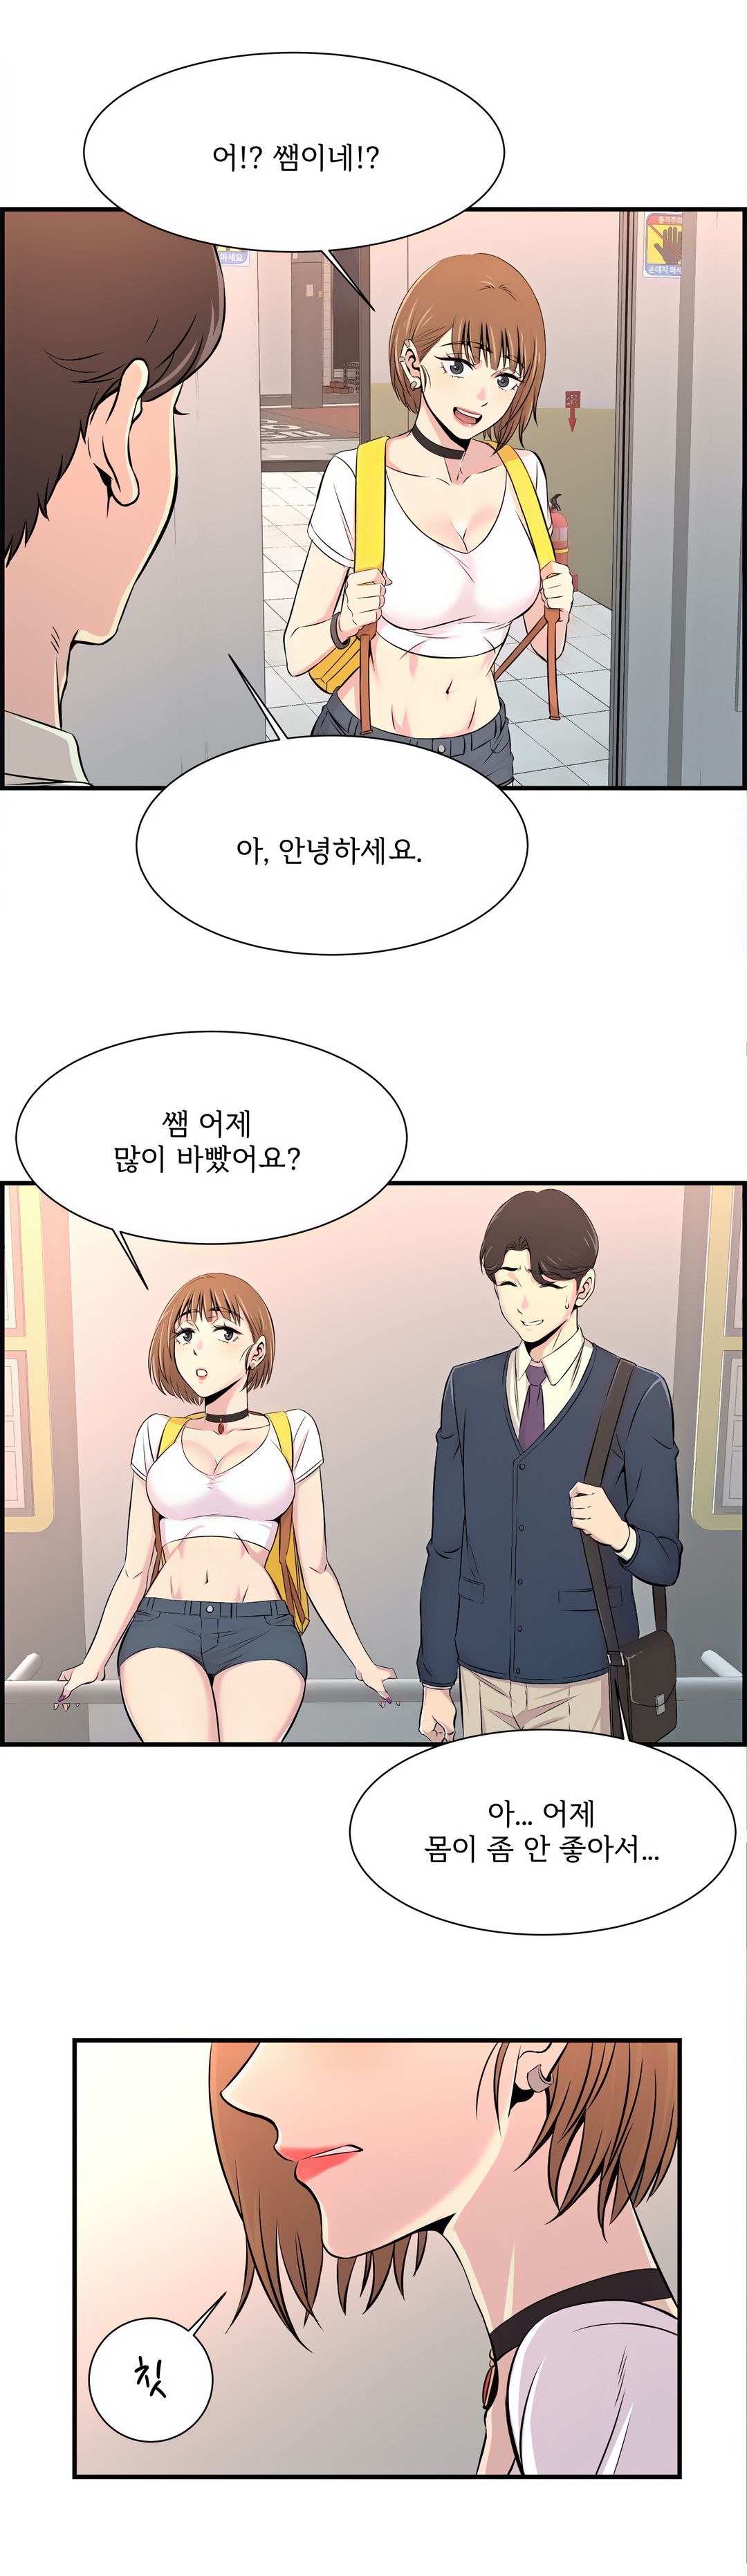 Cram School Scandal Raw - Chapter 13 Page 3